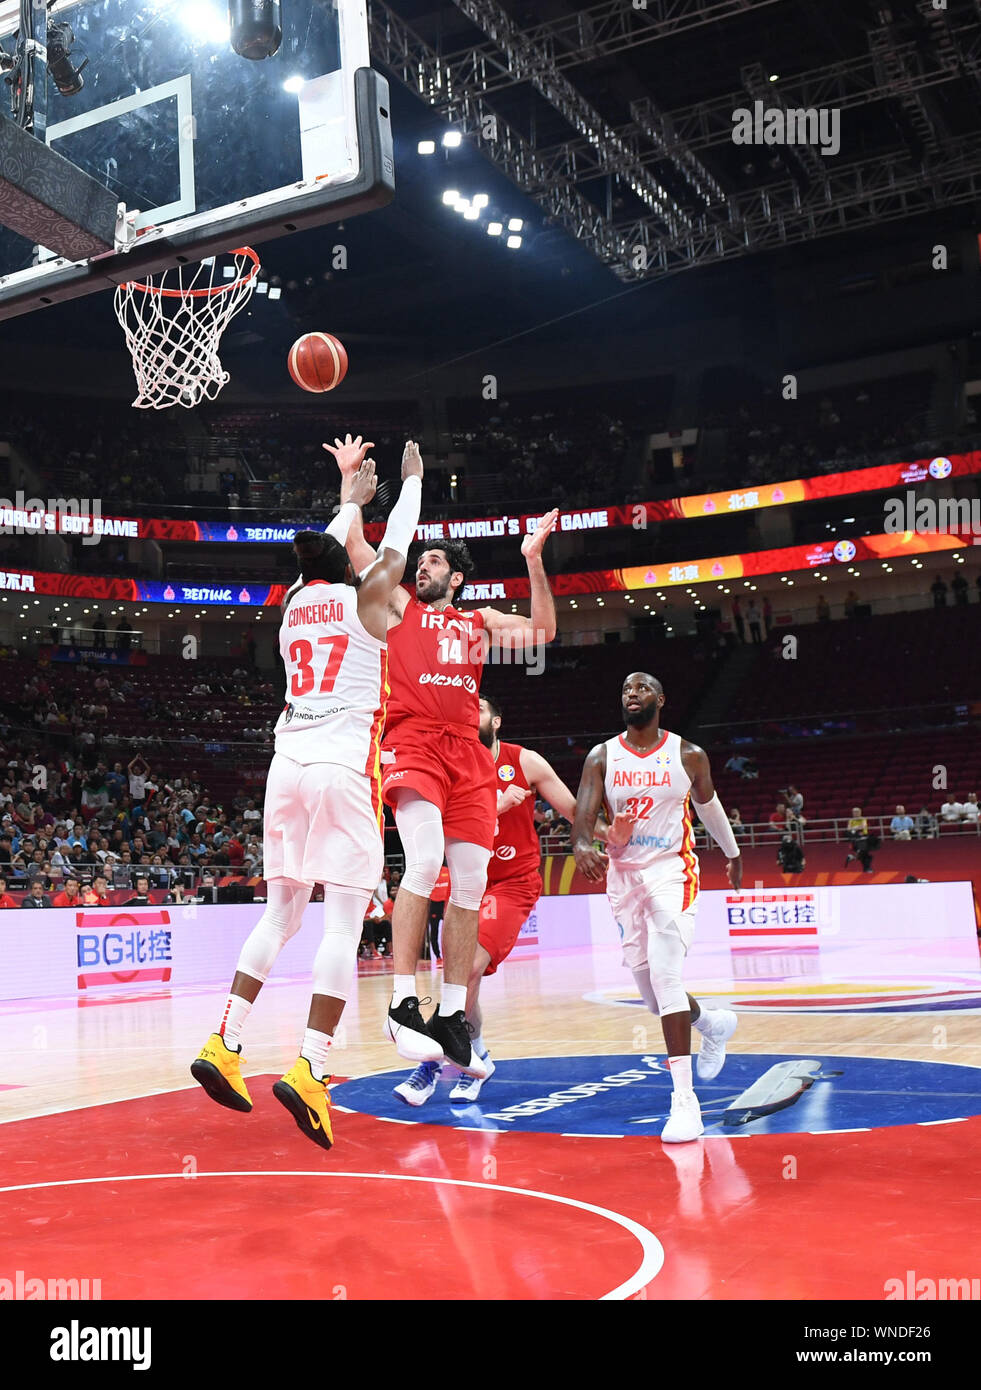 Beijing, China. 6th Sep, 2019. Mohammadsamad Nik Khahbahrami (2nd L) of  Iran shoots the ball during the group N match between Iran and Angola at  the 2019 FIBA World Cup in Beijing,